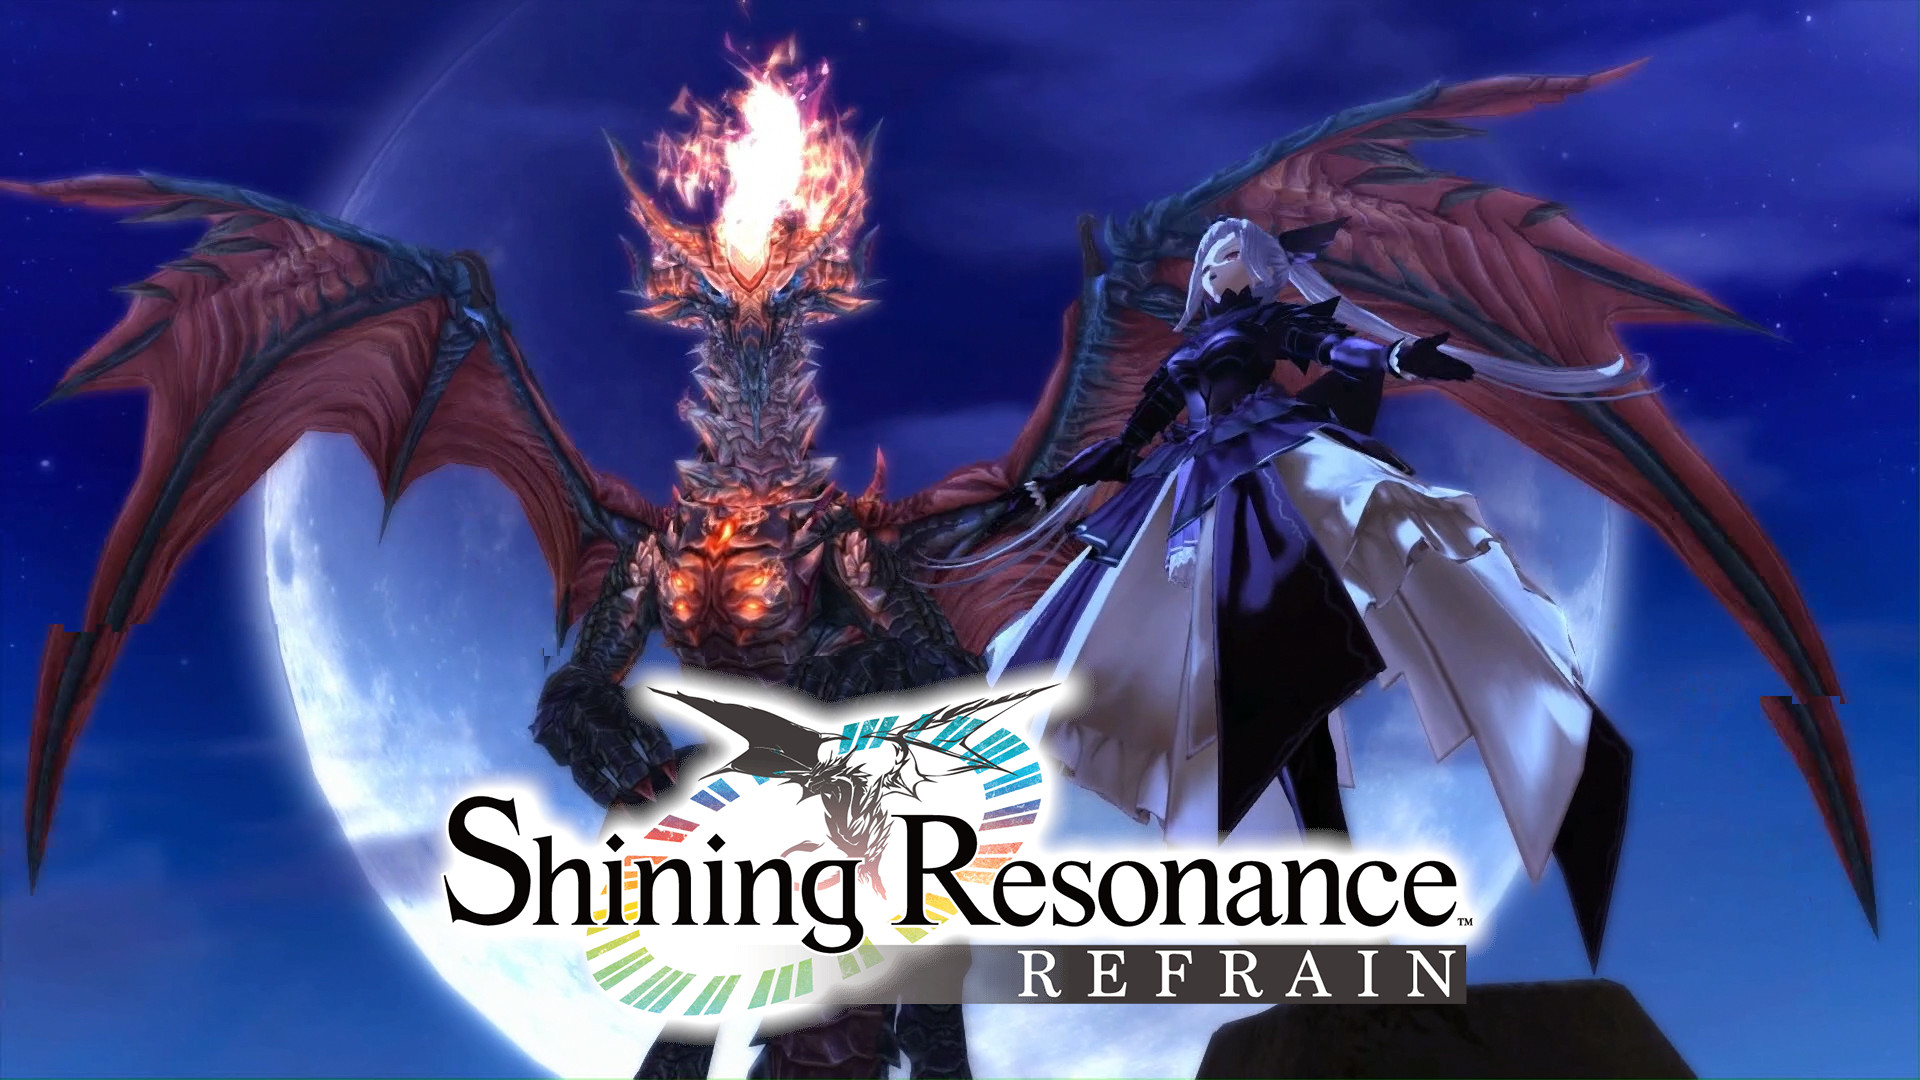 Are We Riding Dragons Or Are Dragons Riding Us? – Shining Resonance Refrain Part 1 [JRPG Time]